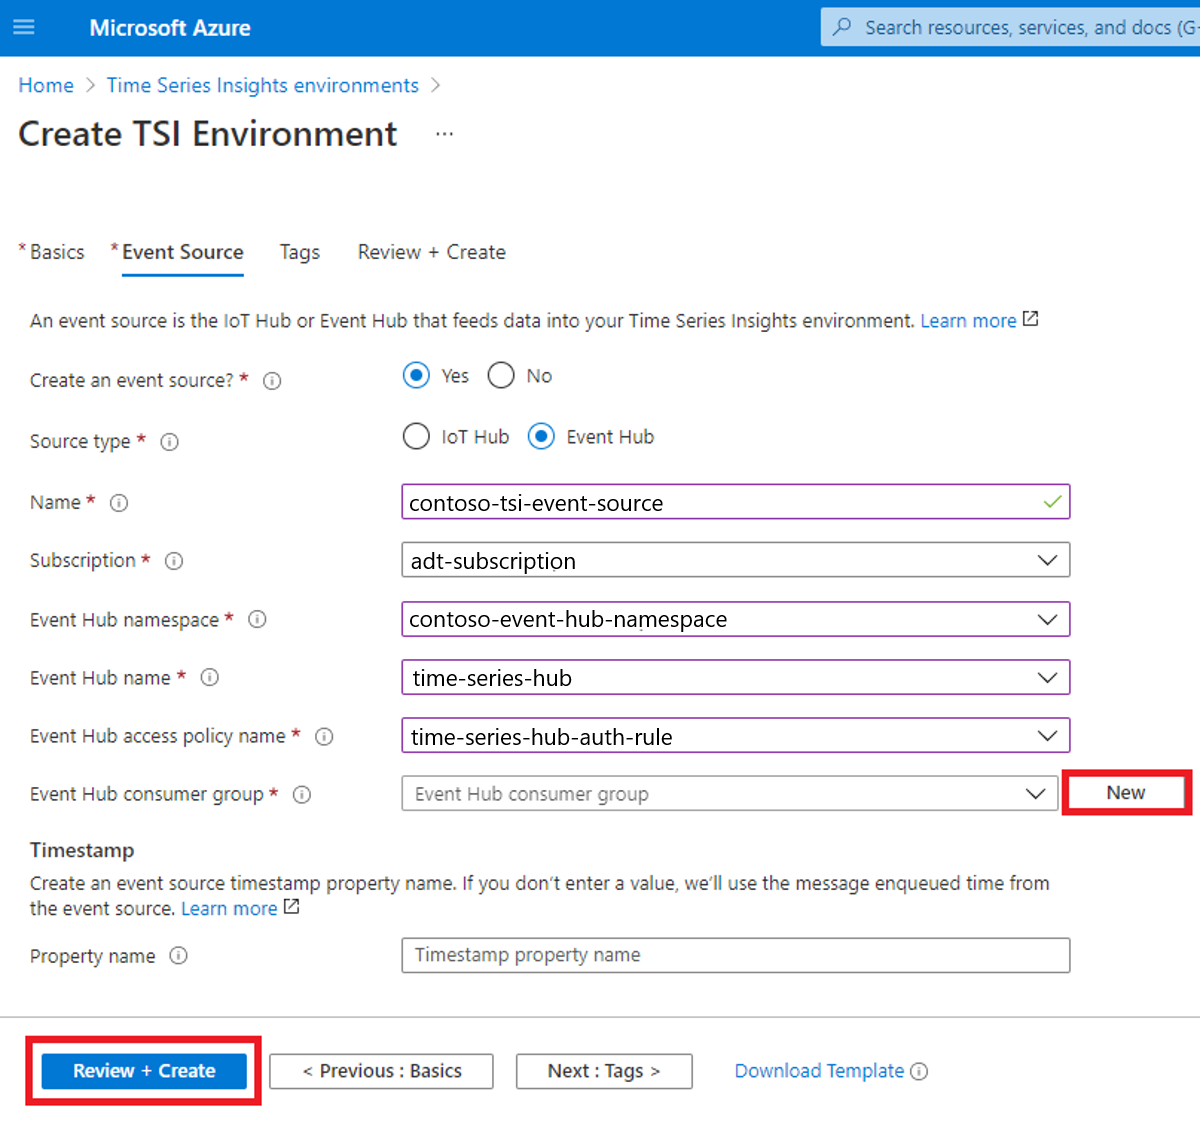 Screenshot of the Azure portal showing how to create Time Series Insights environment (part 3/3).